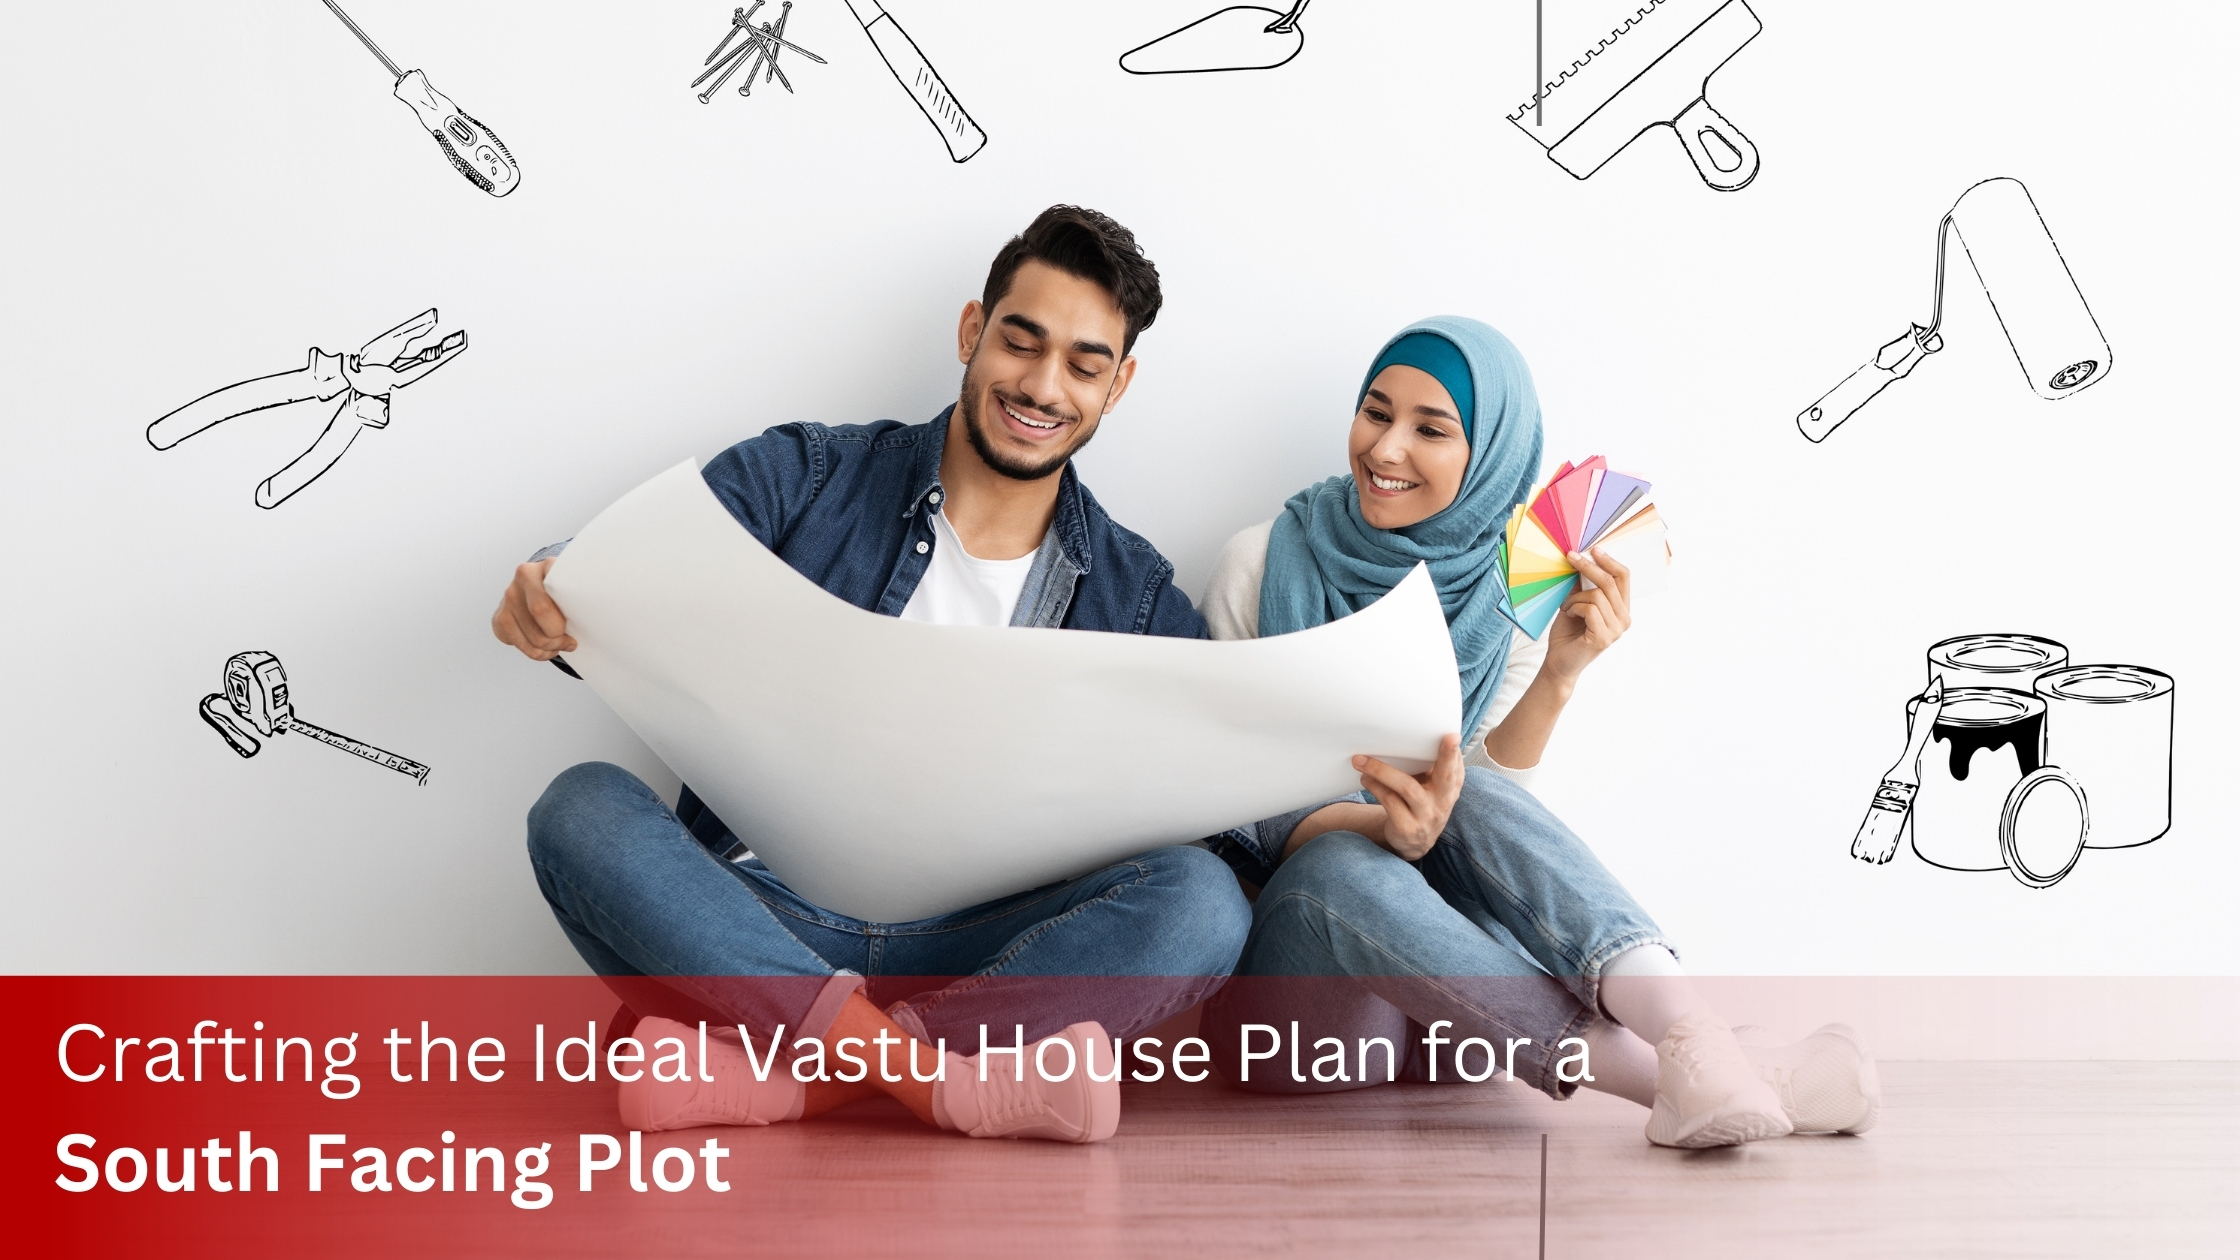 Crafting the Ideal Vastu House Plan for a South Facing Plot